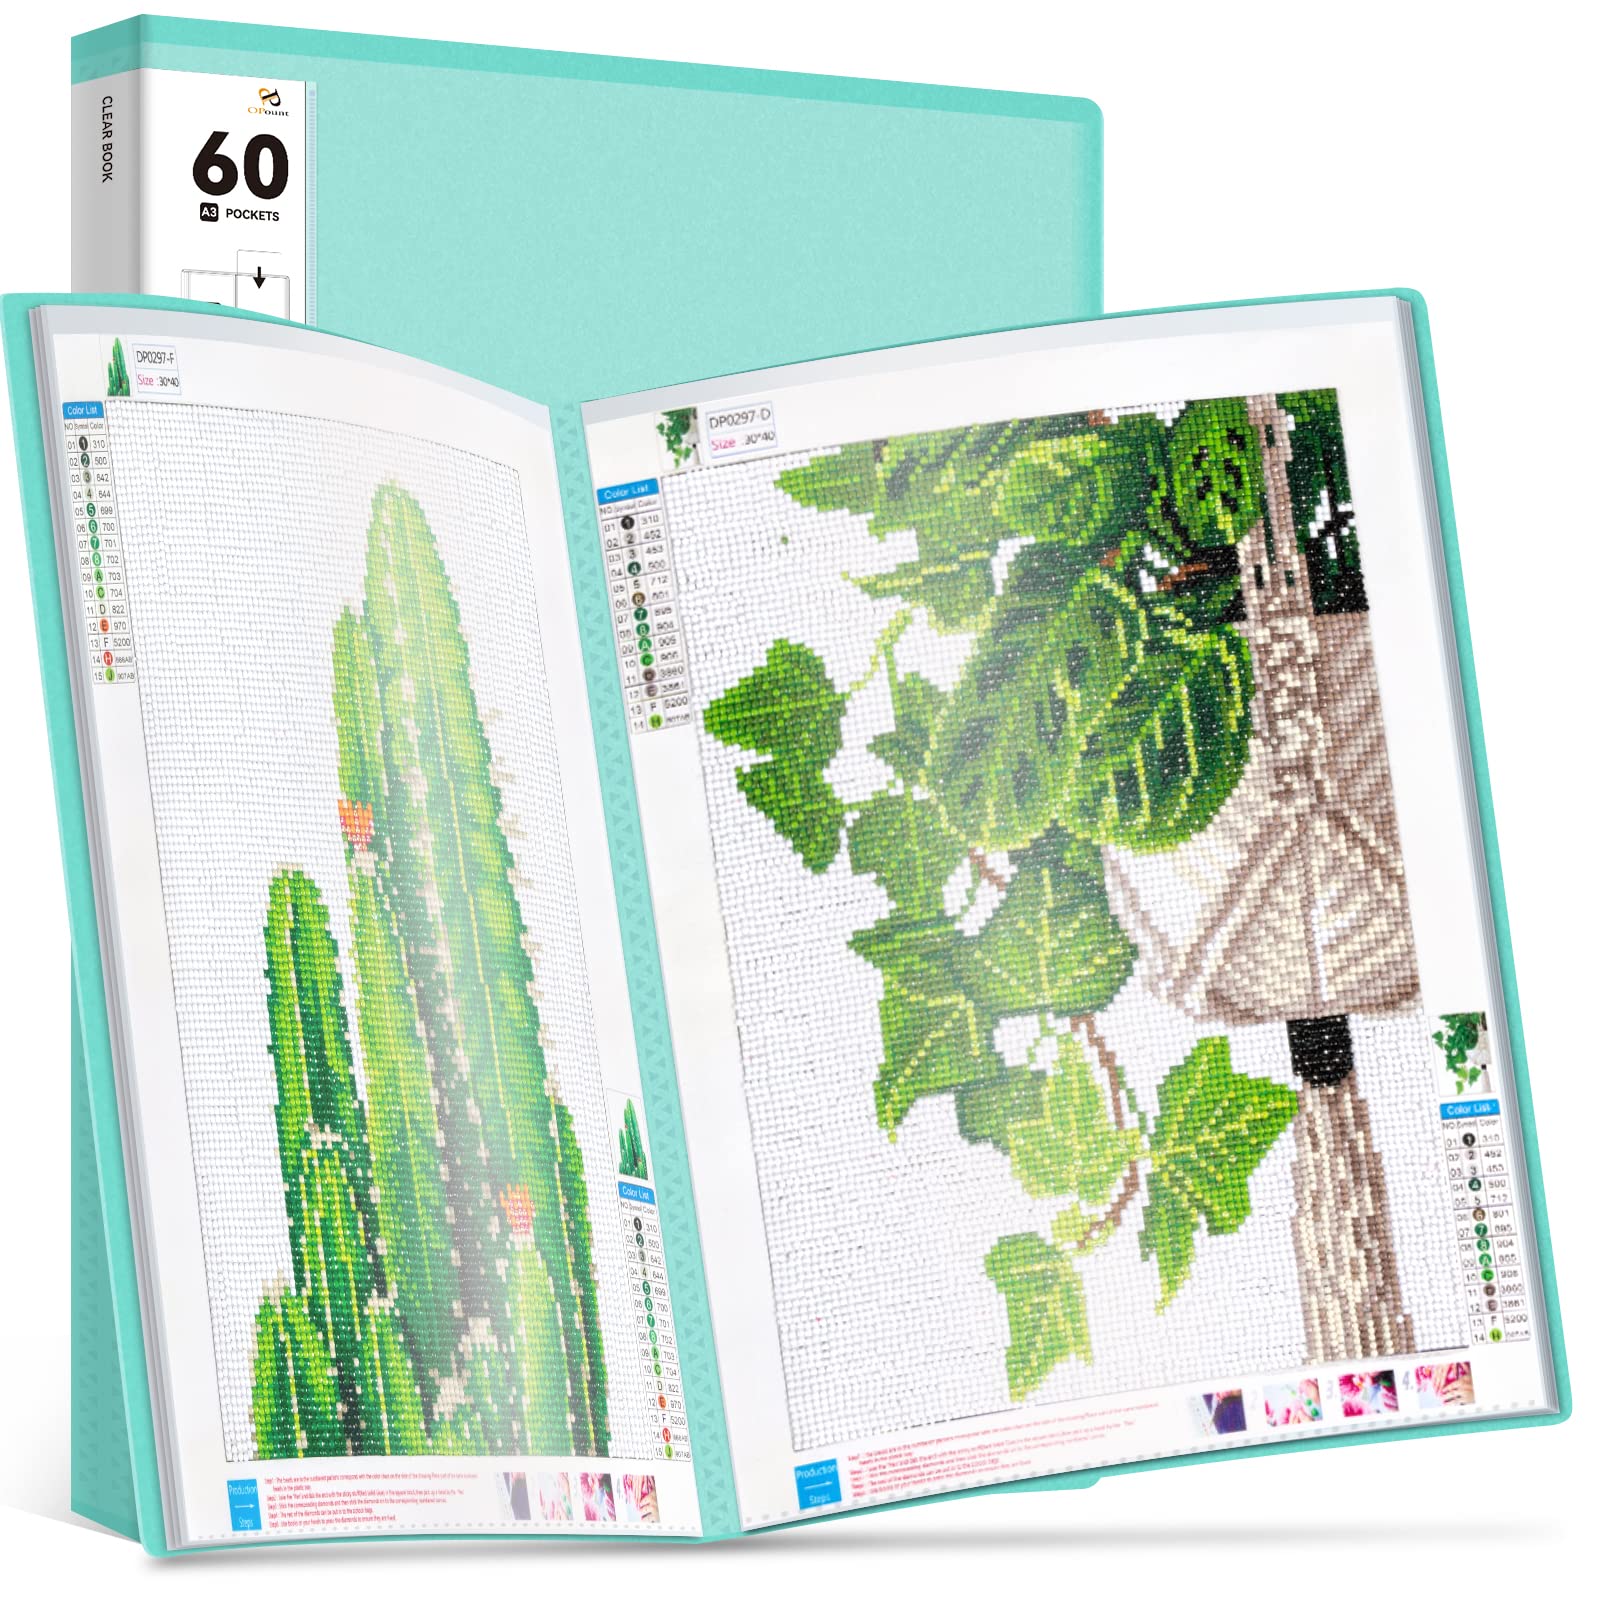 PP OPOUNT 60 Pockets A3 Diamond Painting Storage Book Hold Up to 60 Diamond  Painting Diamond Painting Folder Storage for Diamond Painting Accessories  Diamond Painting Kits(16.5x11.9 inch Green) 60 Pages green